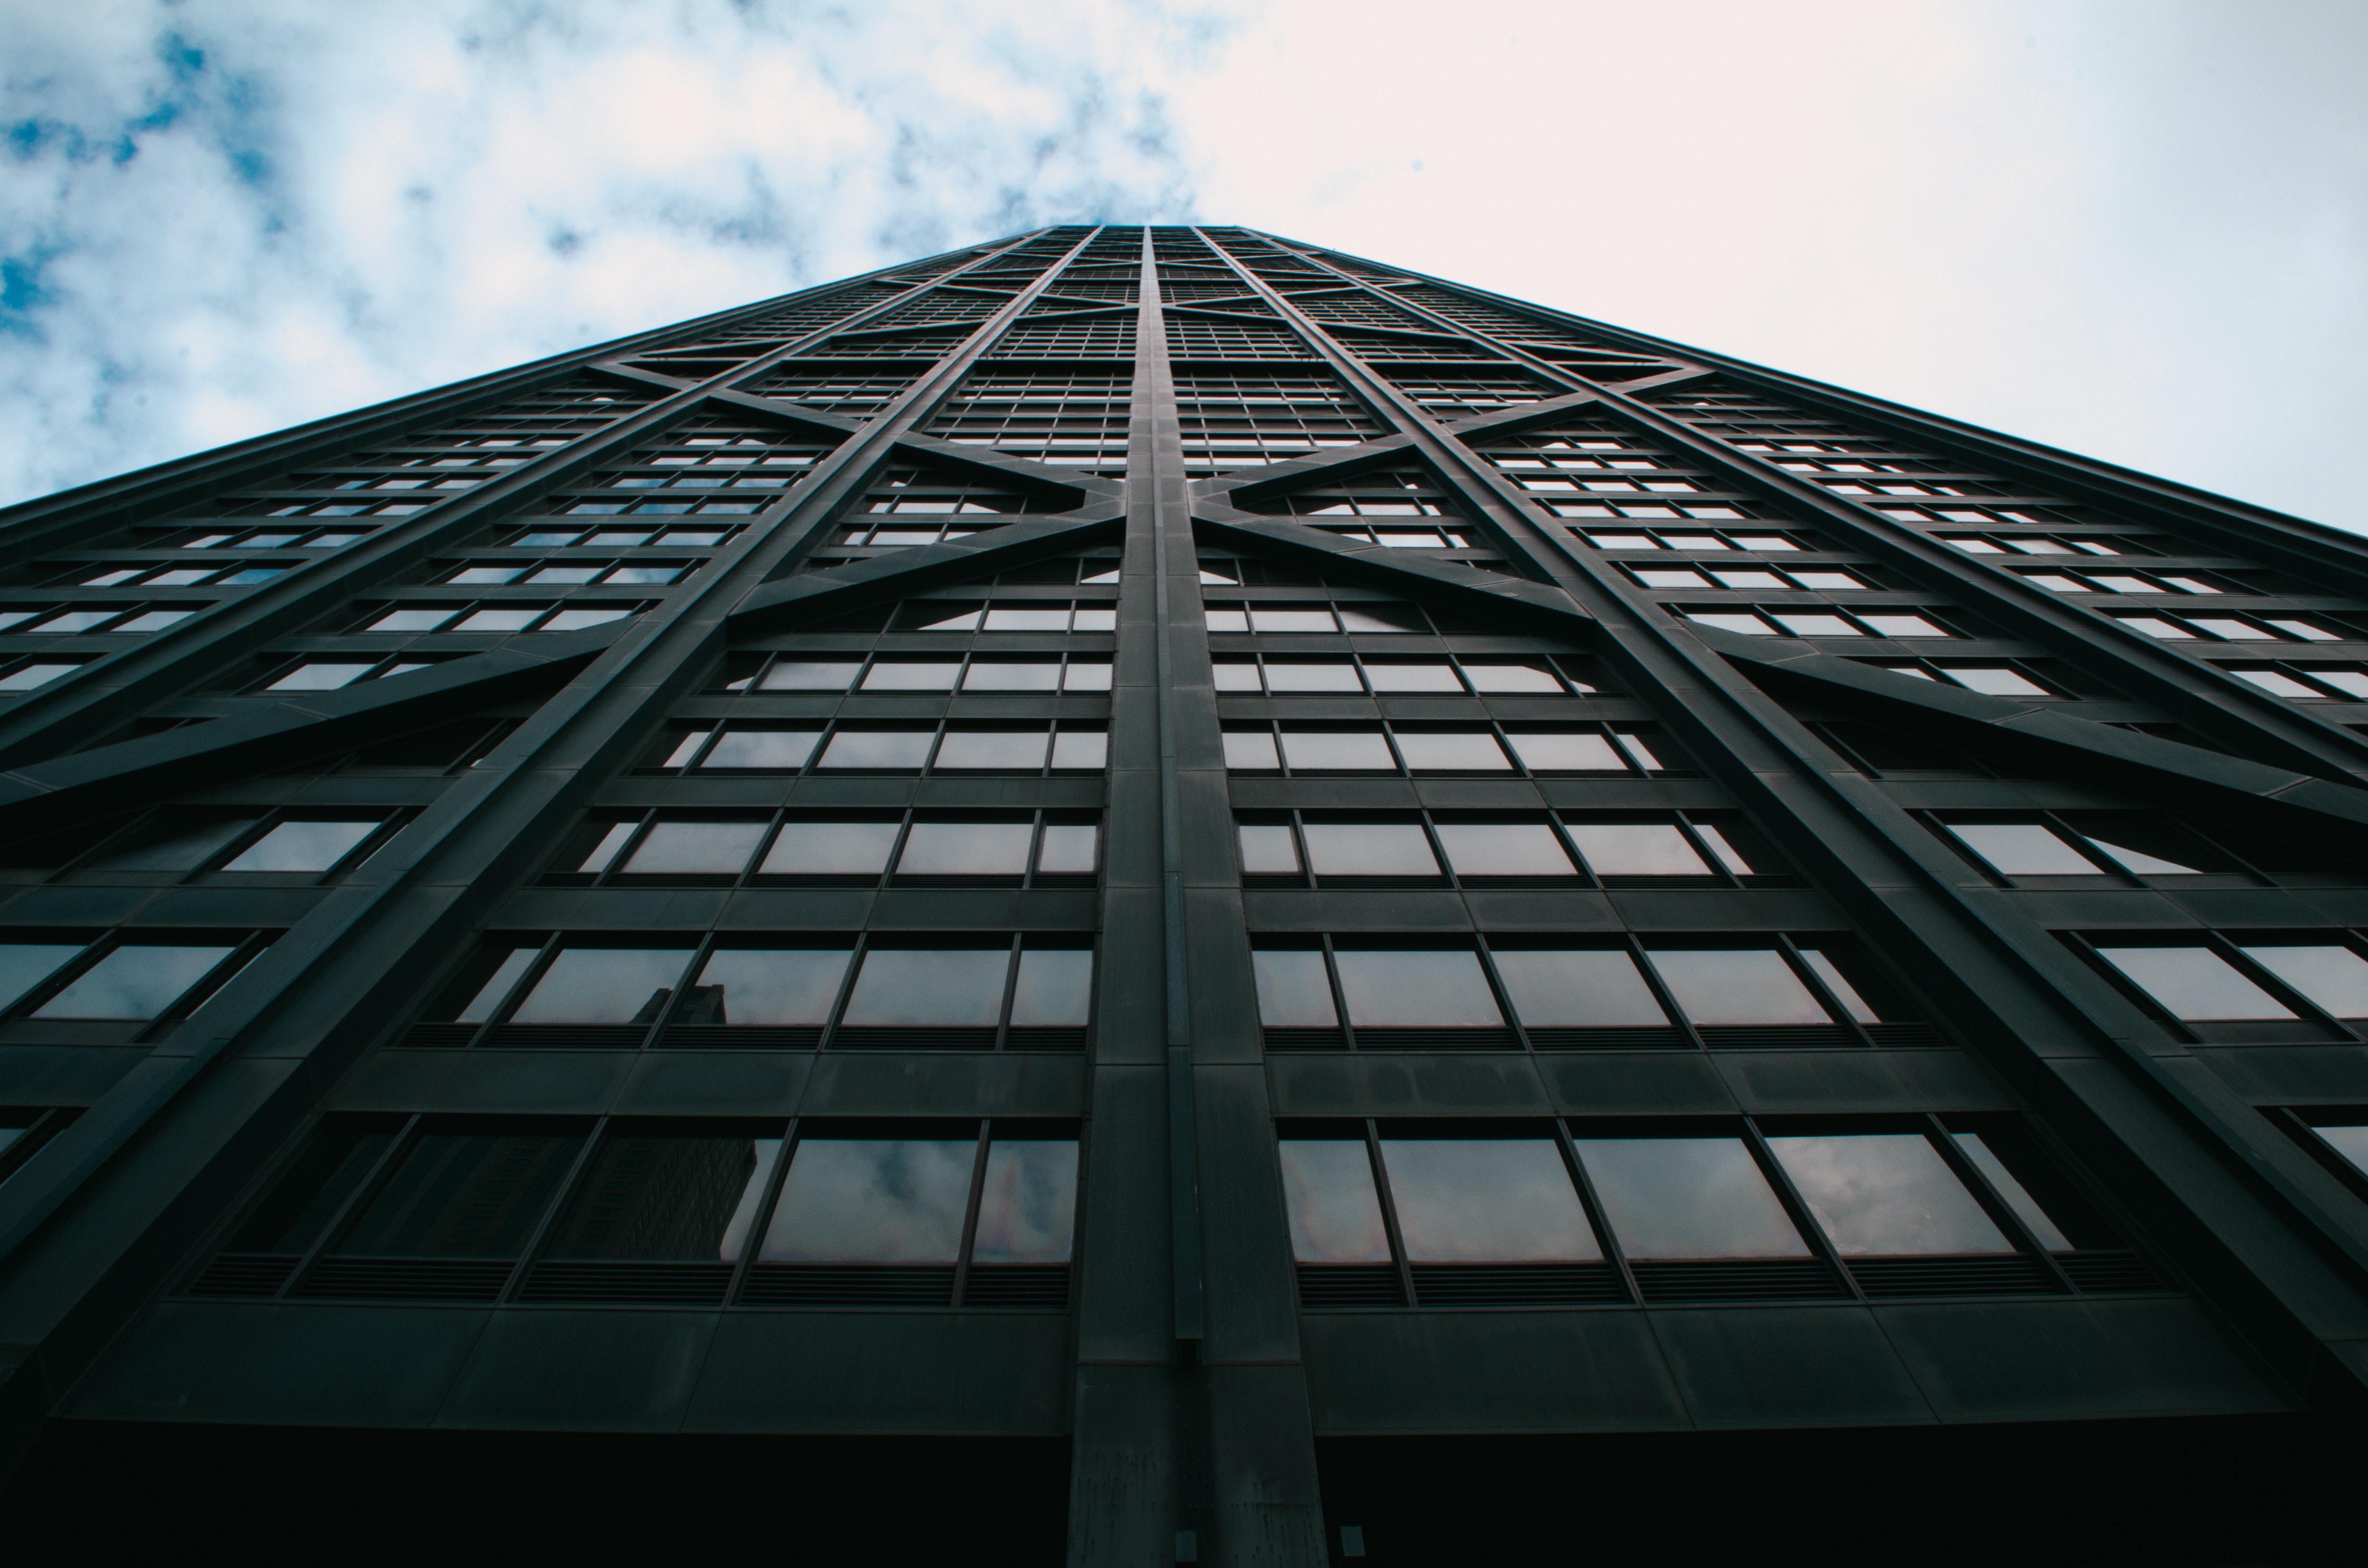 Low-angle Photography of Architectural Building, Architect, Glass windows, Urban, Tall, HQ Photo